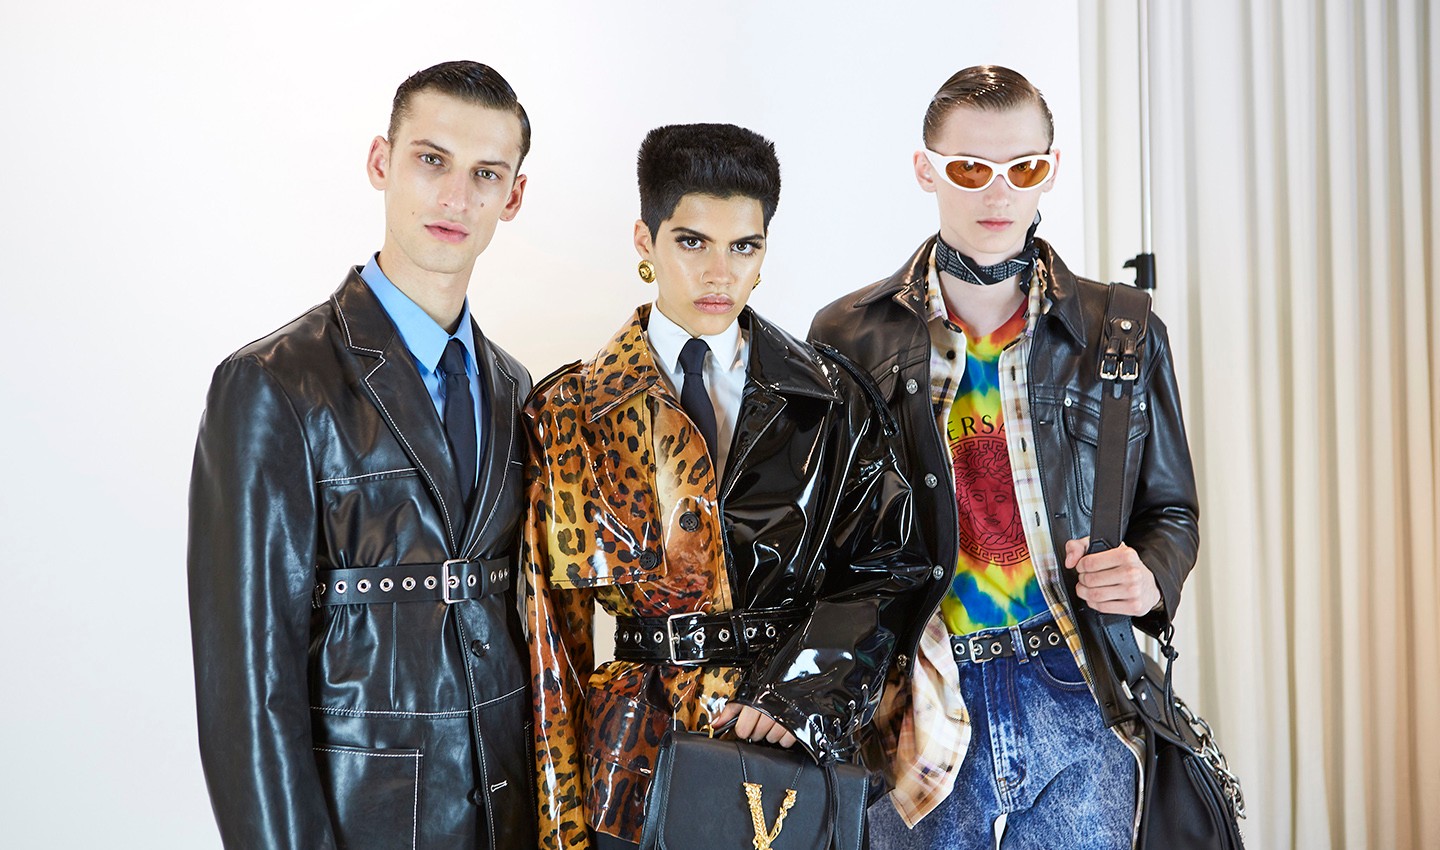 Versace Spring 2020: Post Punk and In Your Face - Global Fashion News